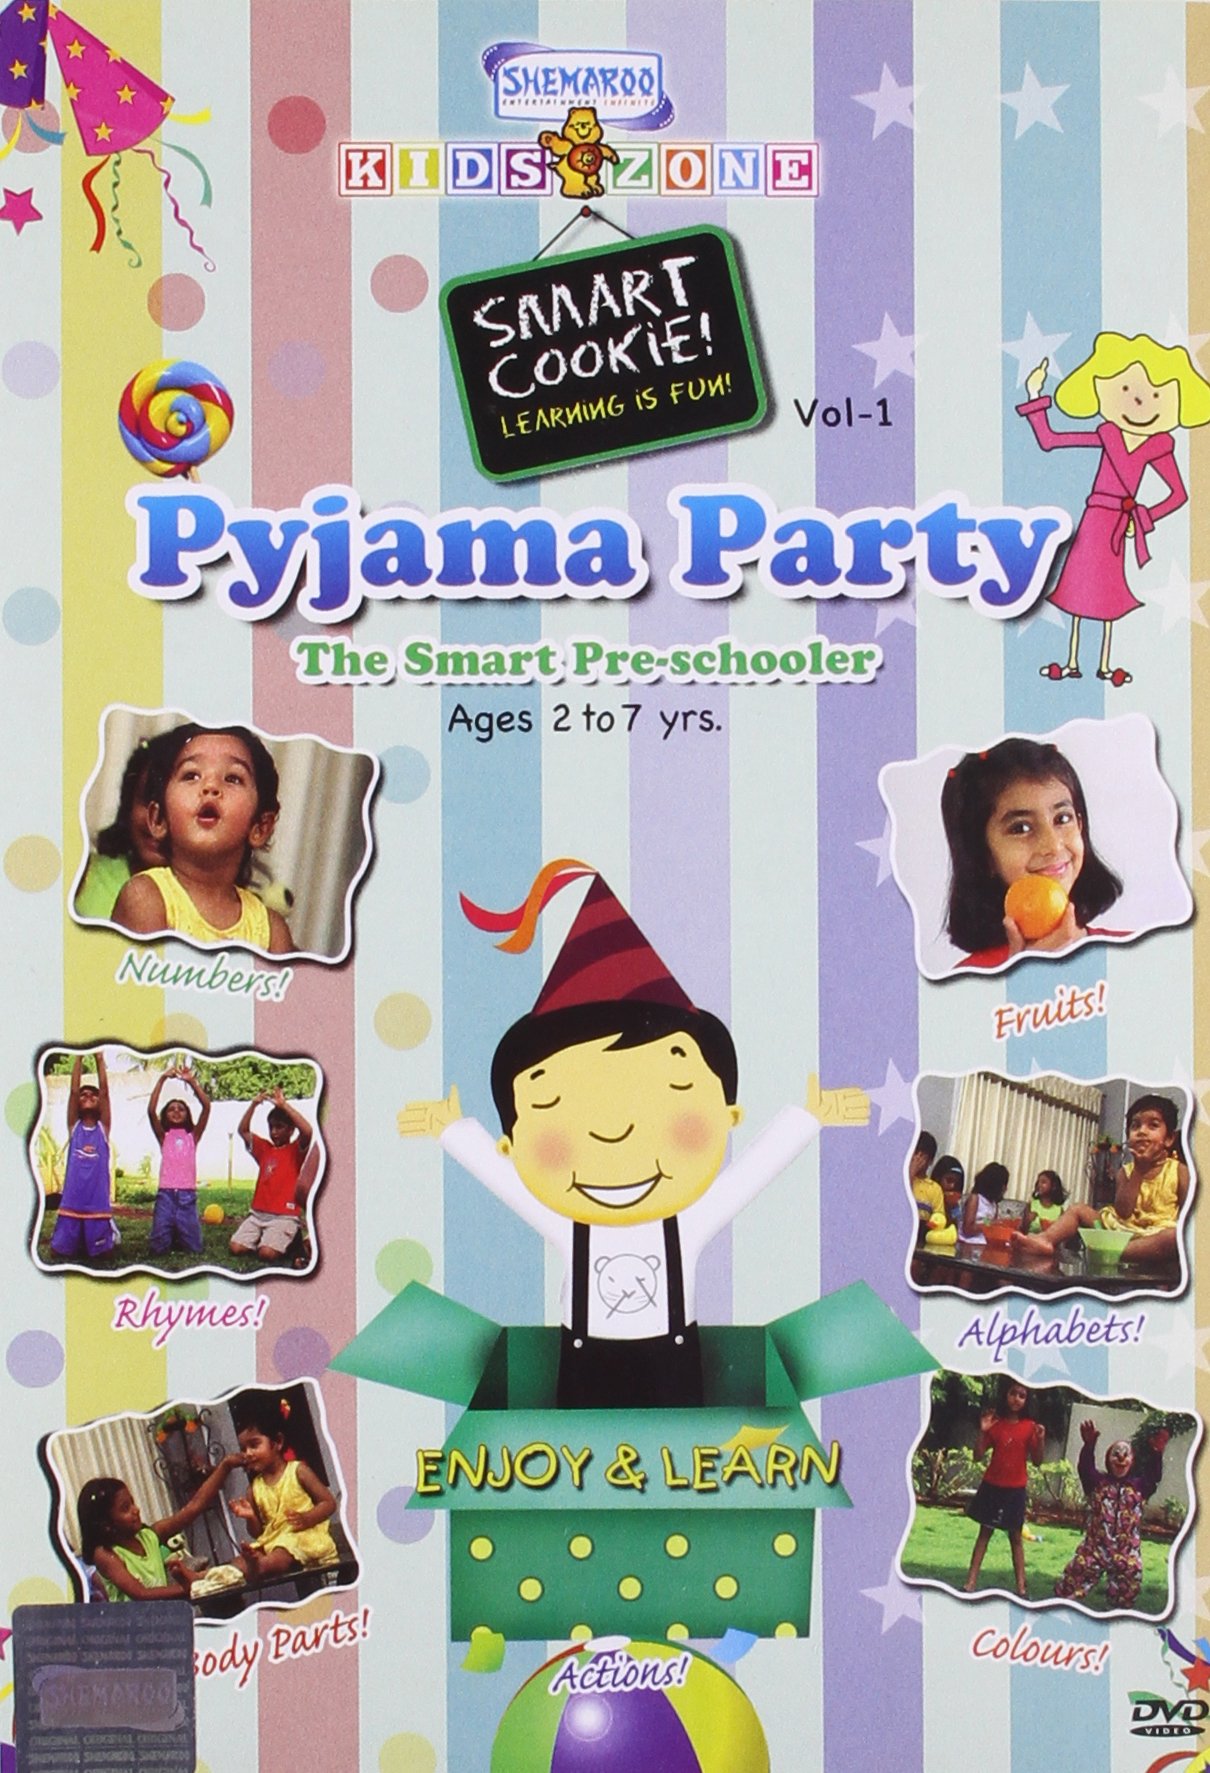 smart-cookie-vol-1-pyjama-party-movie-purchase-or-watch-online